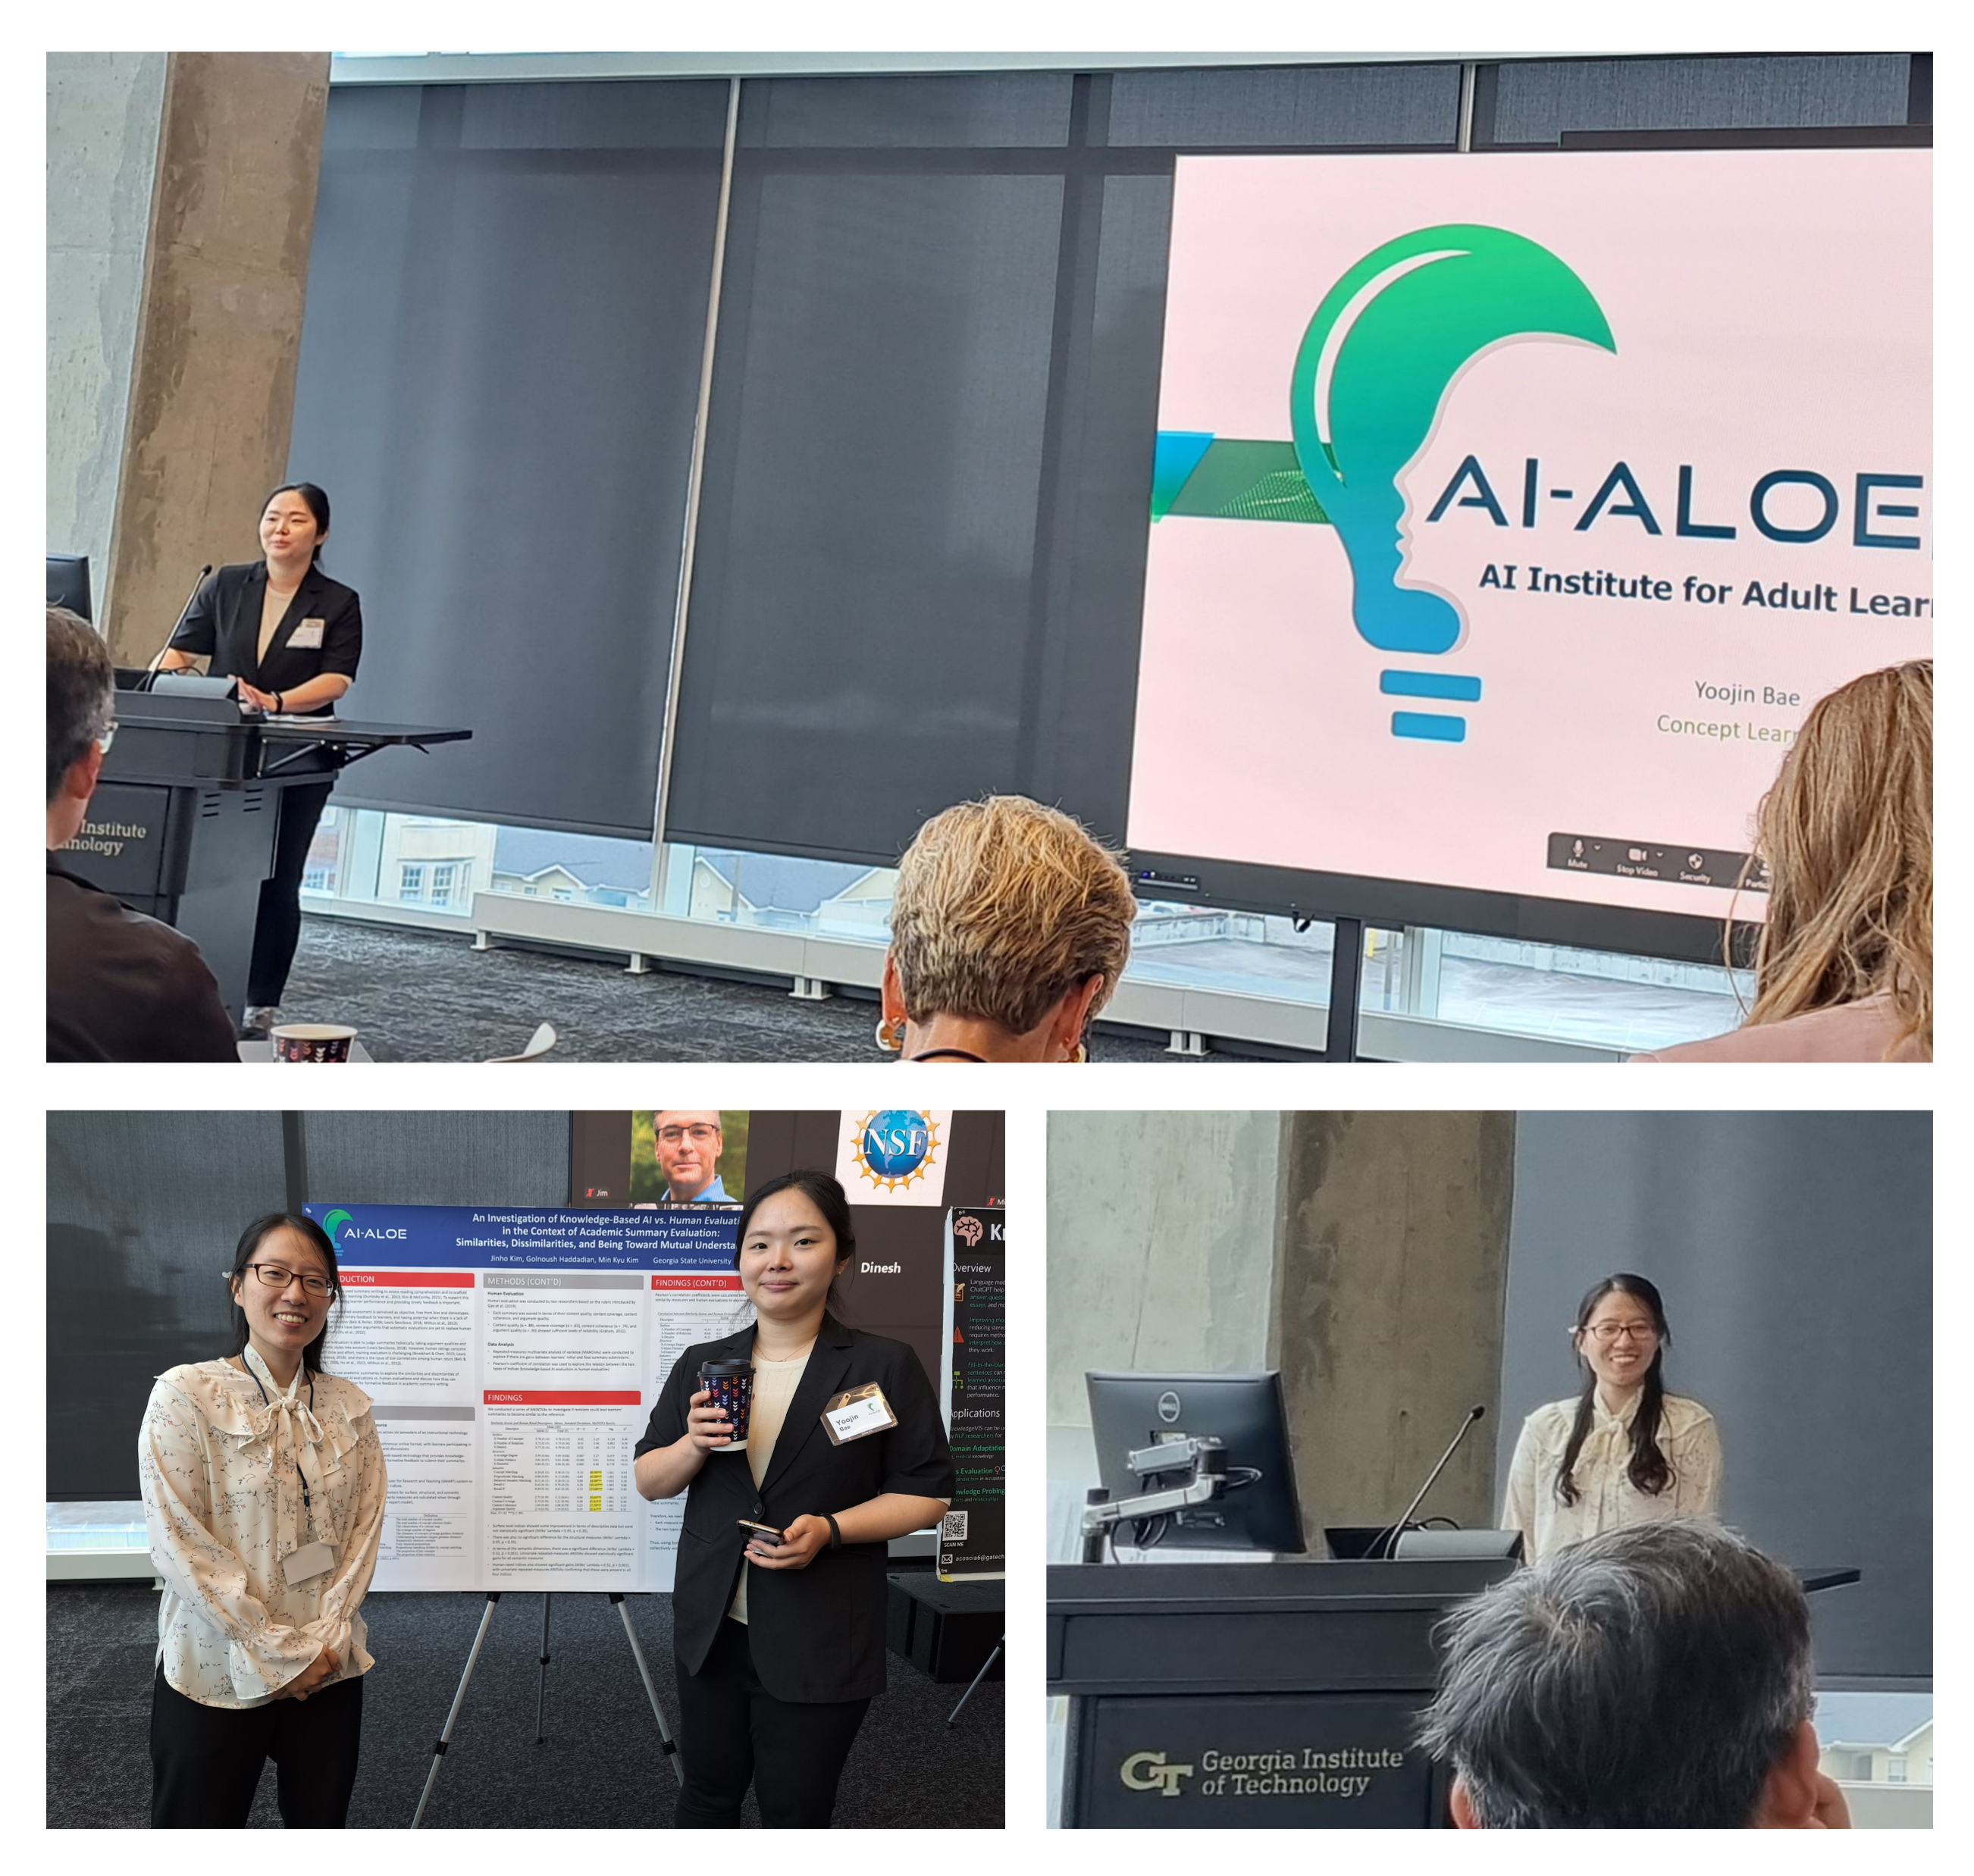 AI-ALOE's Annual Review Meeting attended by AI2 Lab Members